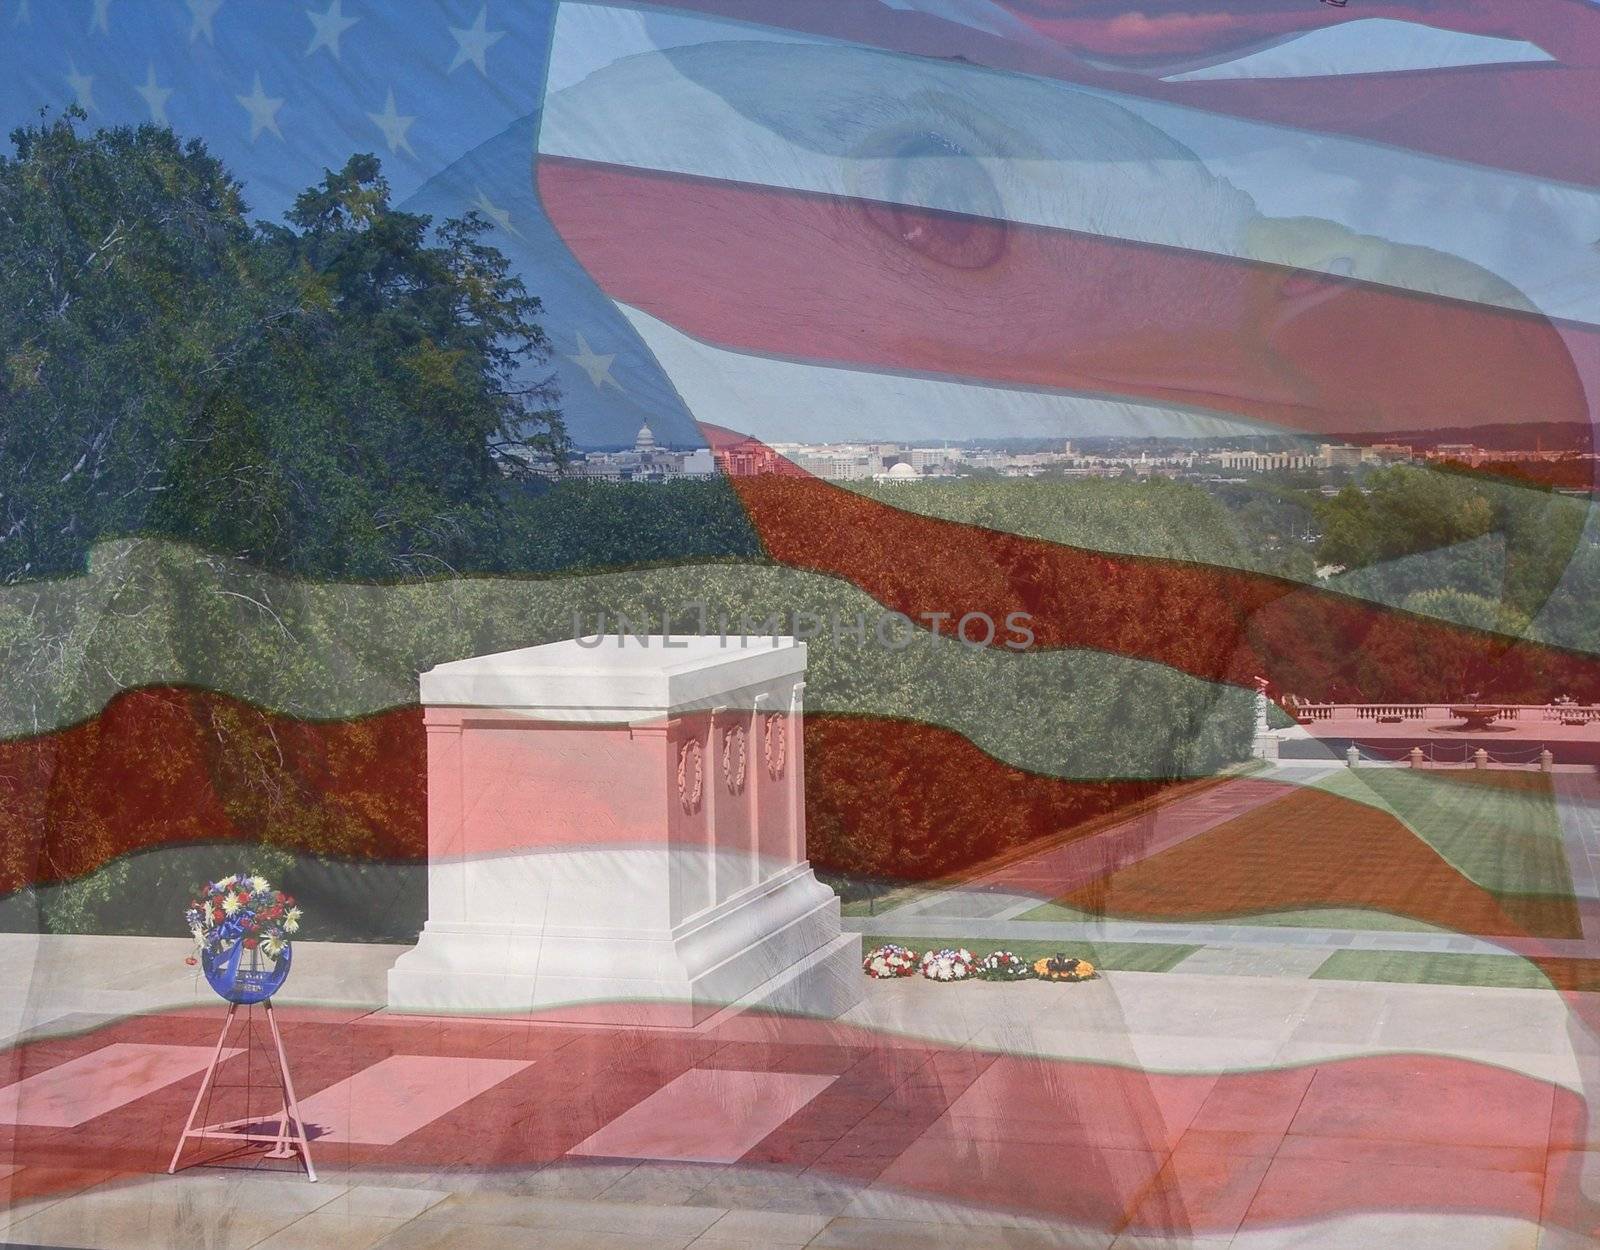 Flag, Eagle, Tomb of the Unknowns. Composite of three photos taken by the author.

